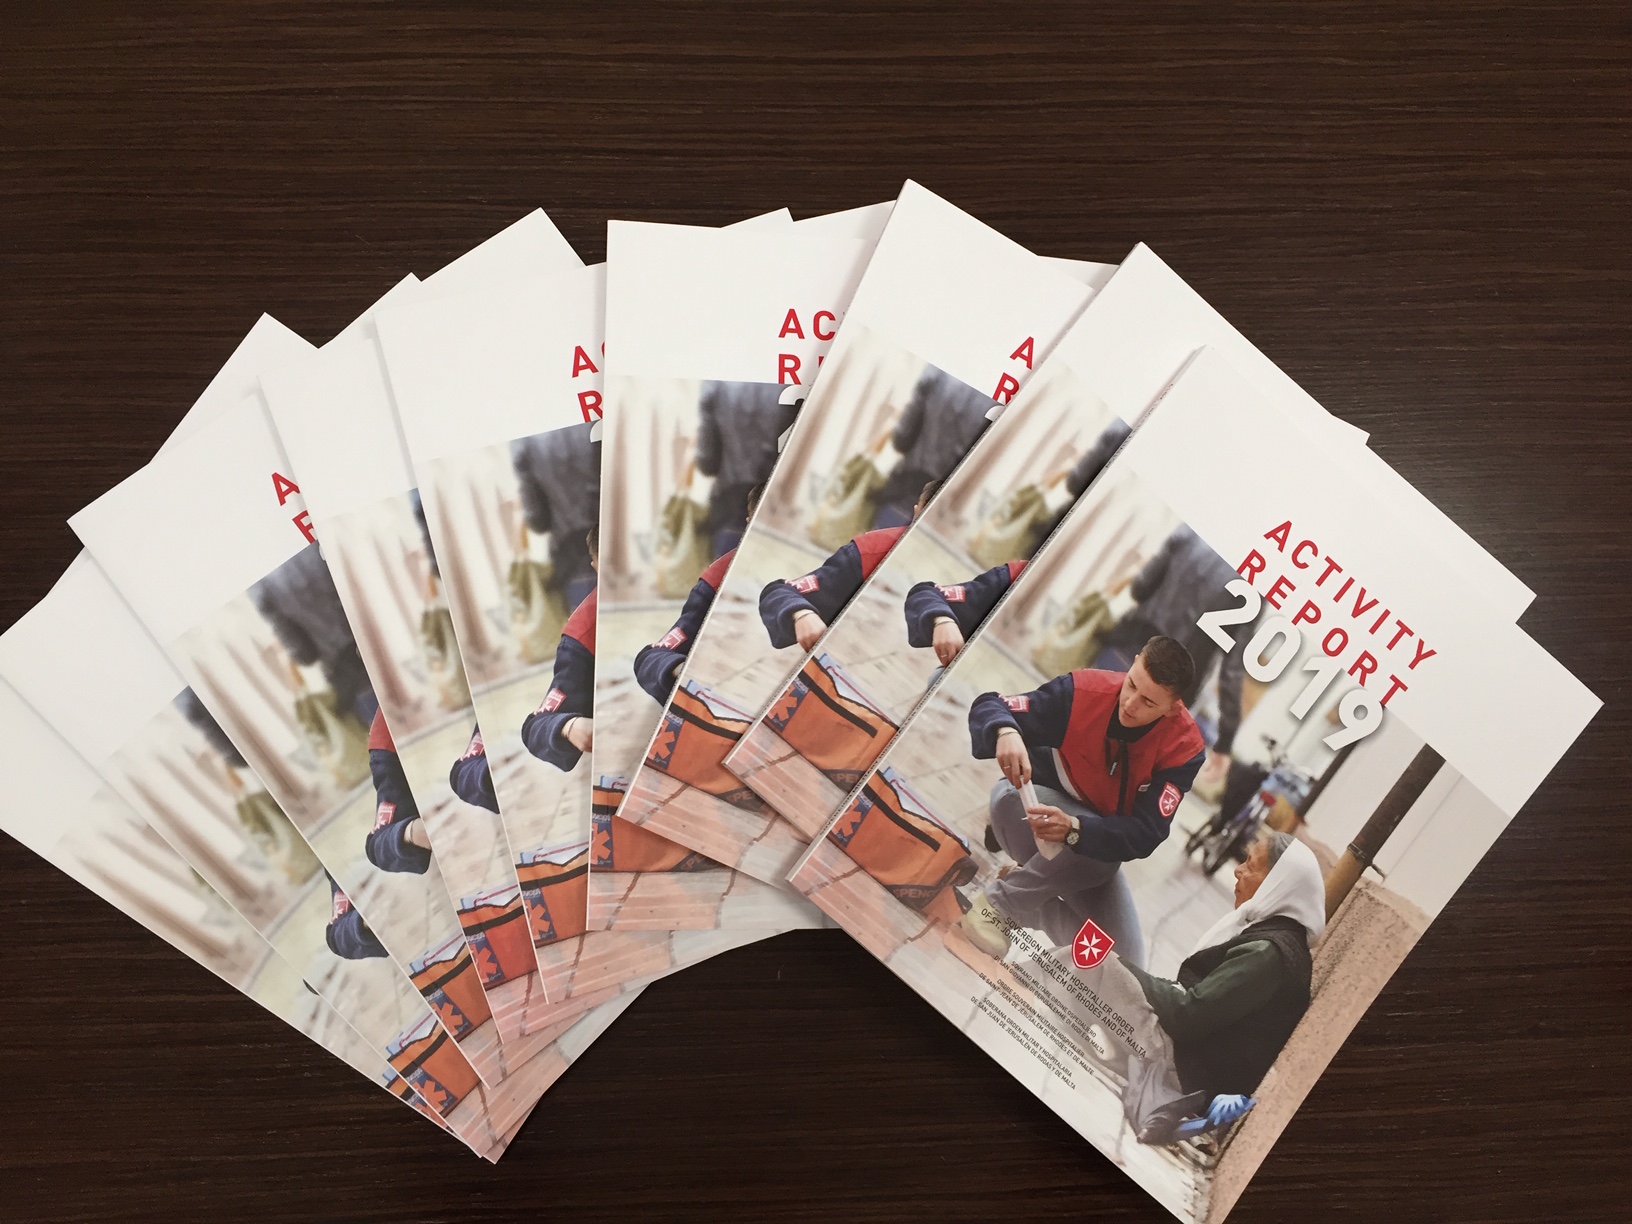 The Order of Malta’s new 2019 Activity Report published